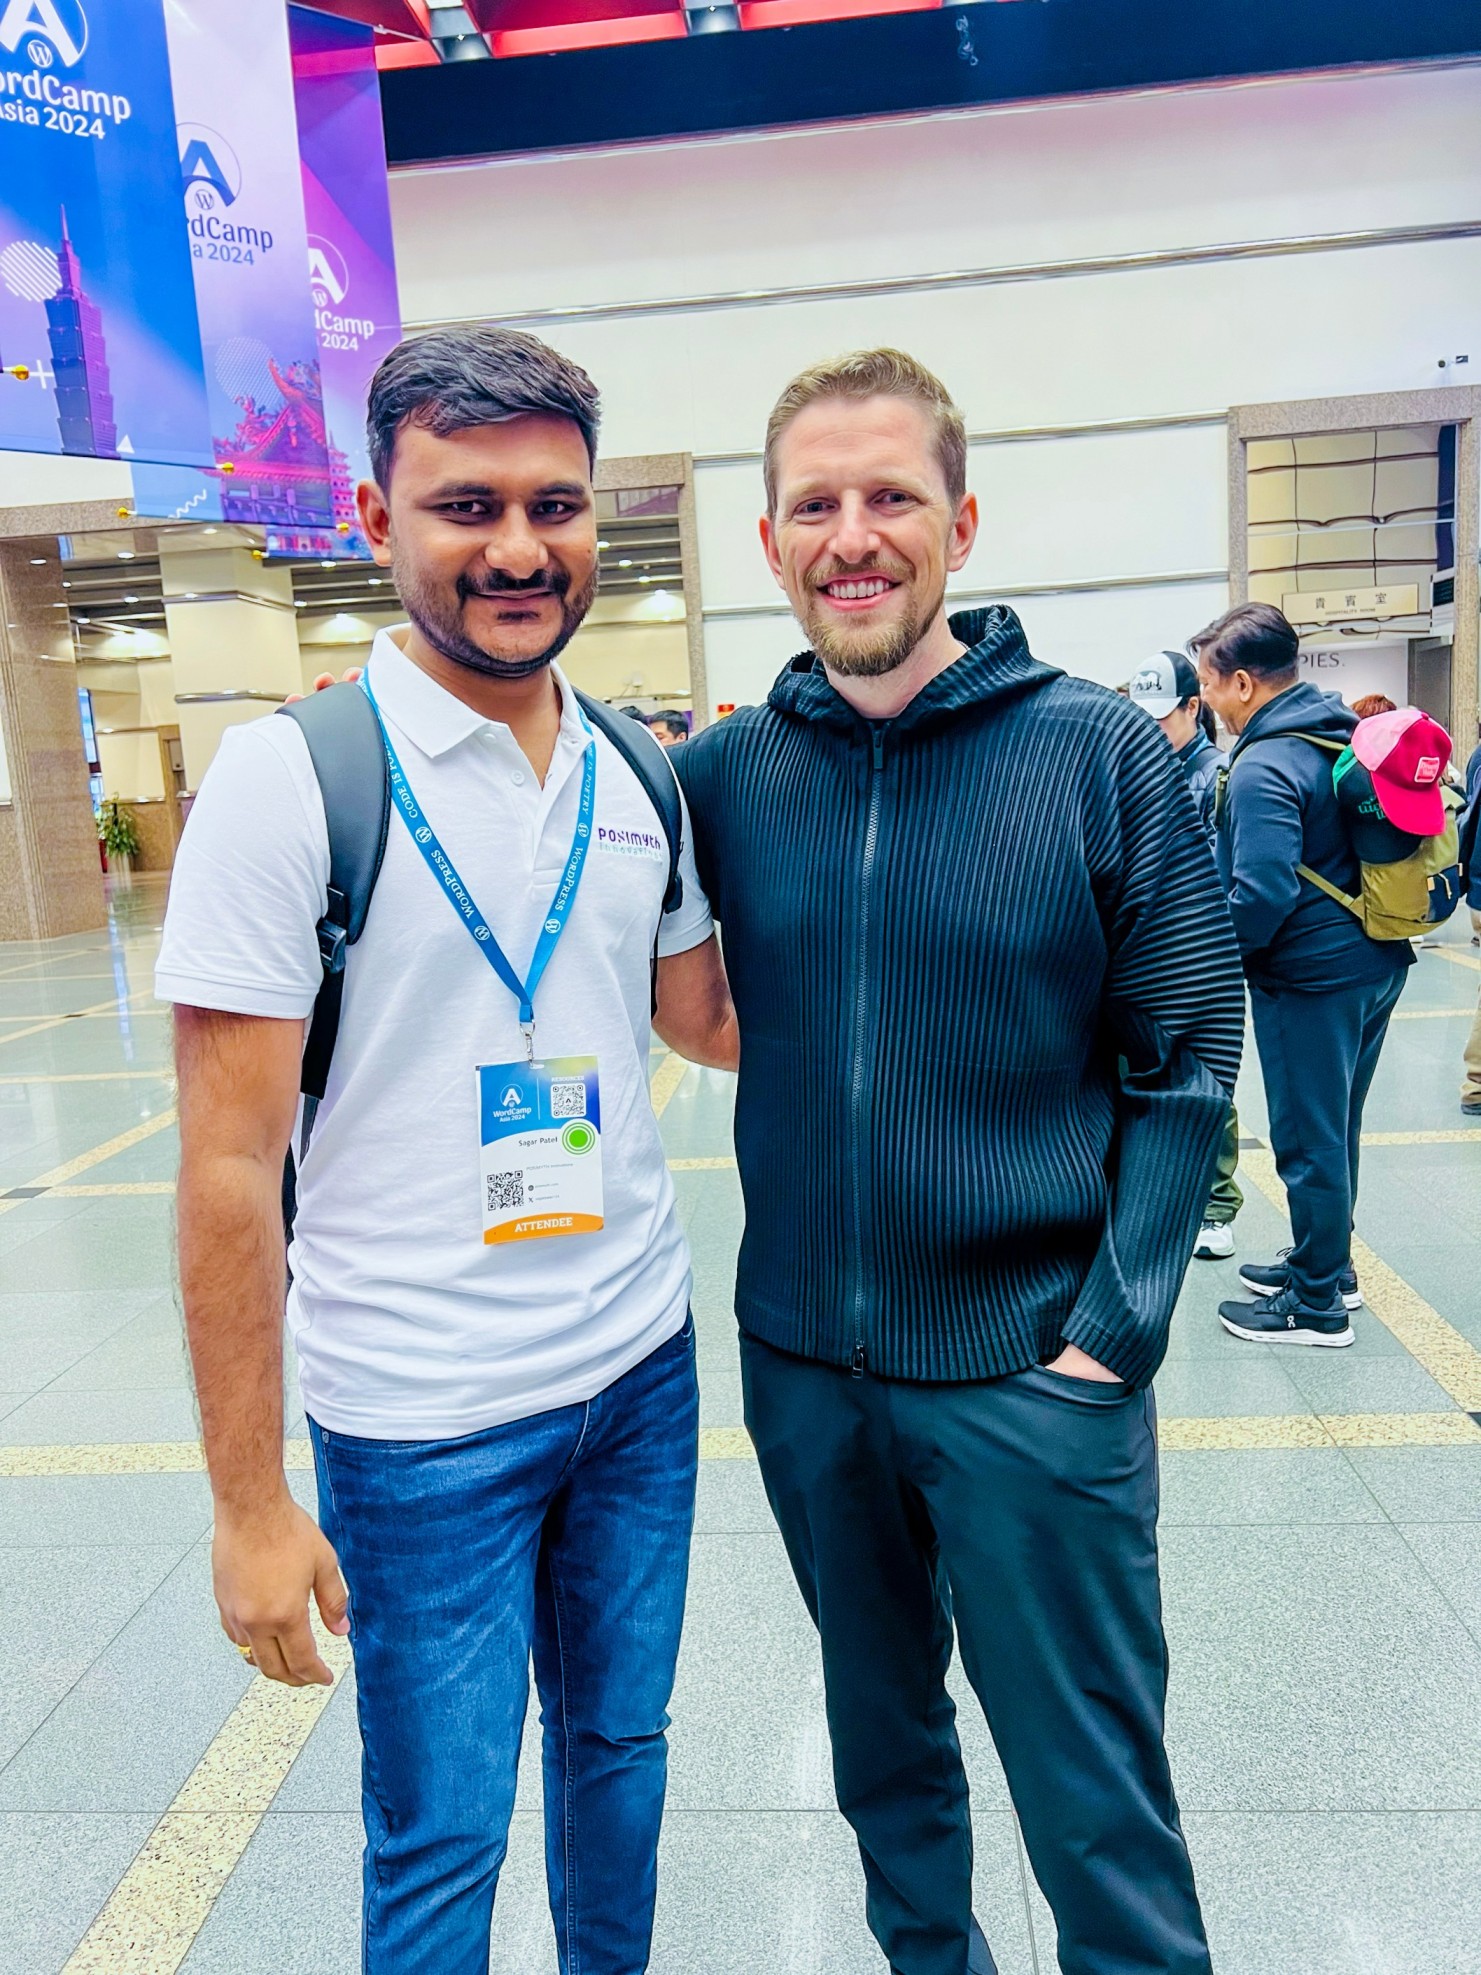 Recap of WordCamp Asia 2024: My Experience, Insights and Connections